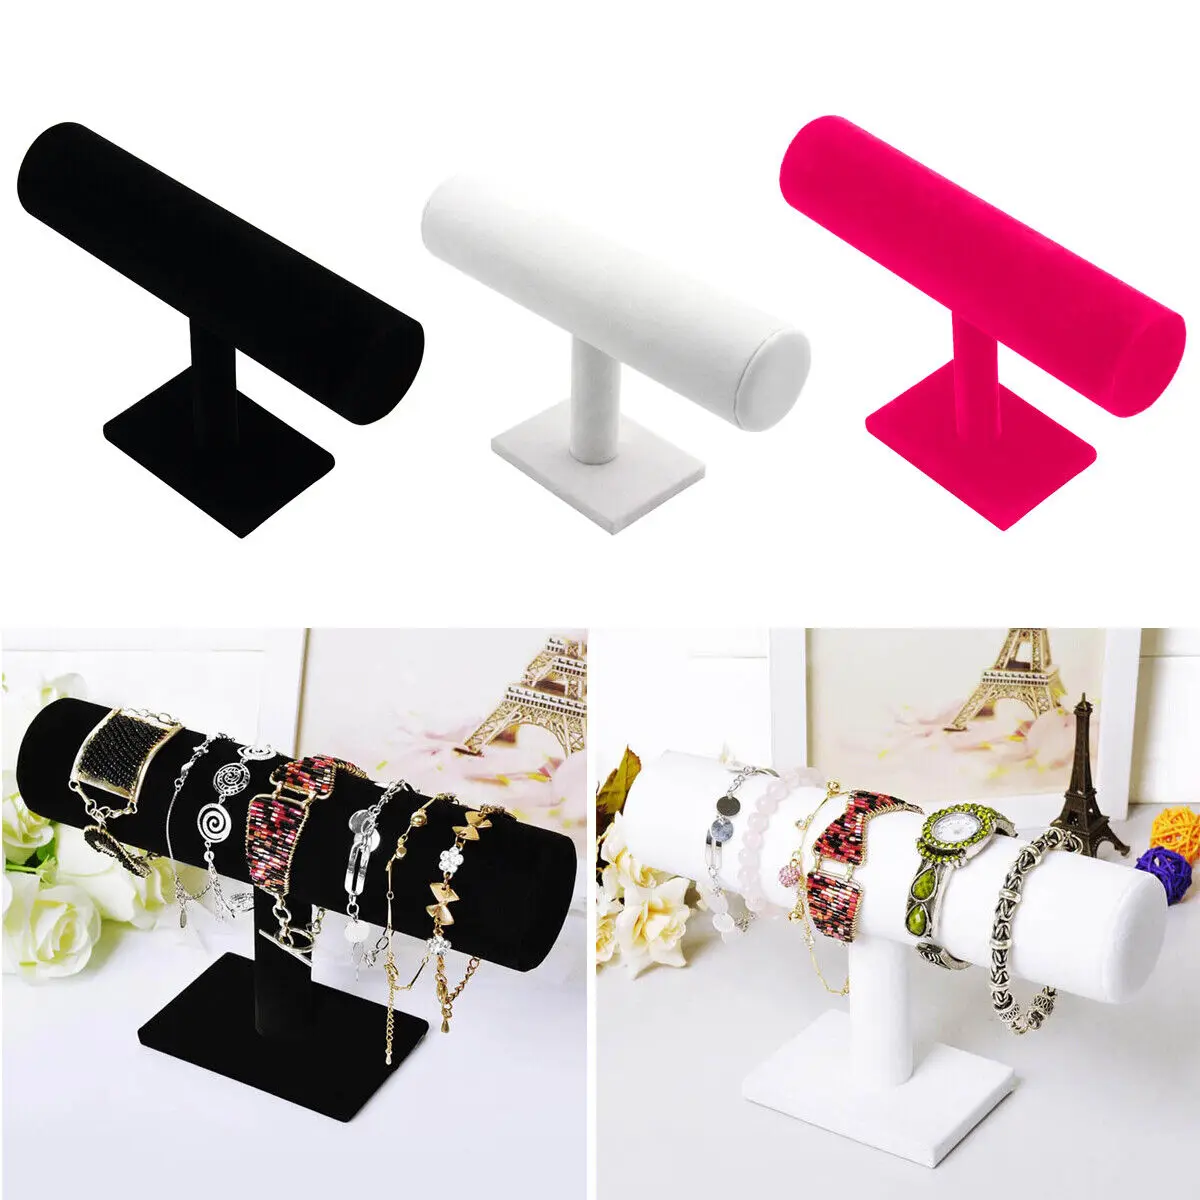 Single Tier Velvet Bracelet Chain Watch T-Bar Rack Jewelry Hard Display Stand Holder Jewelry Organizer High Qualitydisplay Stand bracelet jewelry pillow stand velvet pu leather holder organizer presentation case bangle anklet watch display photography prop